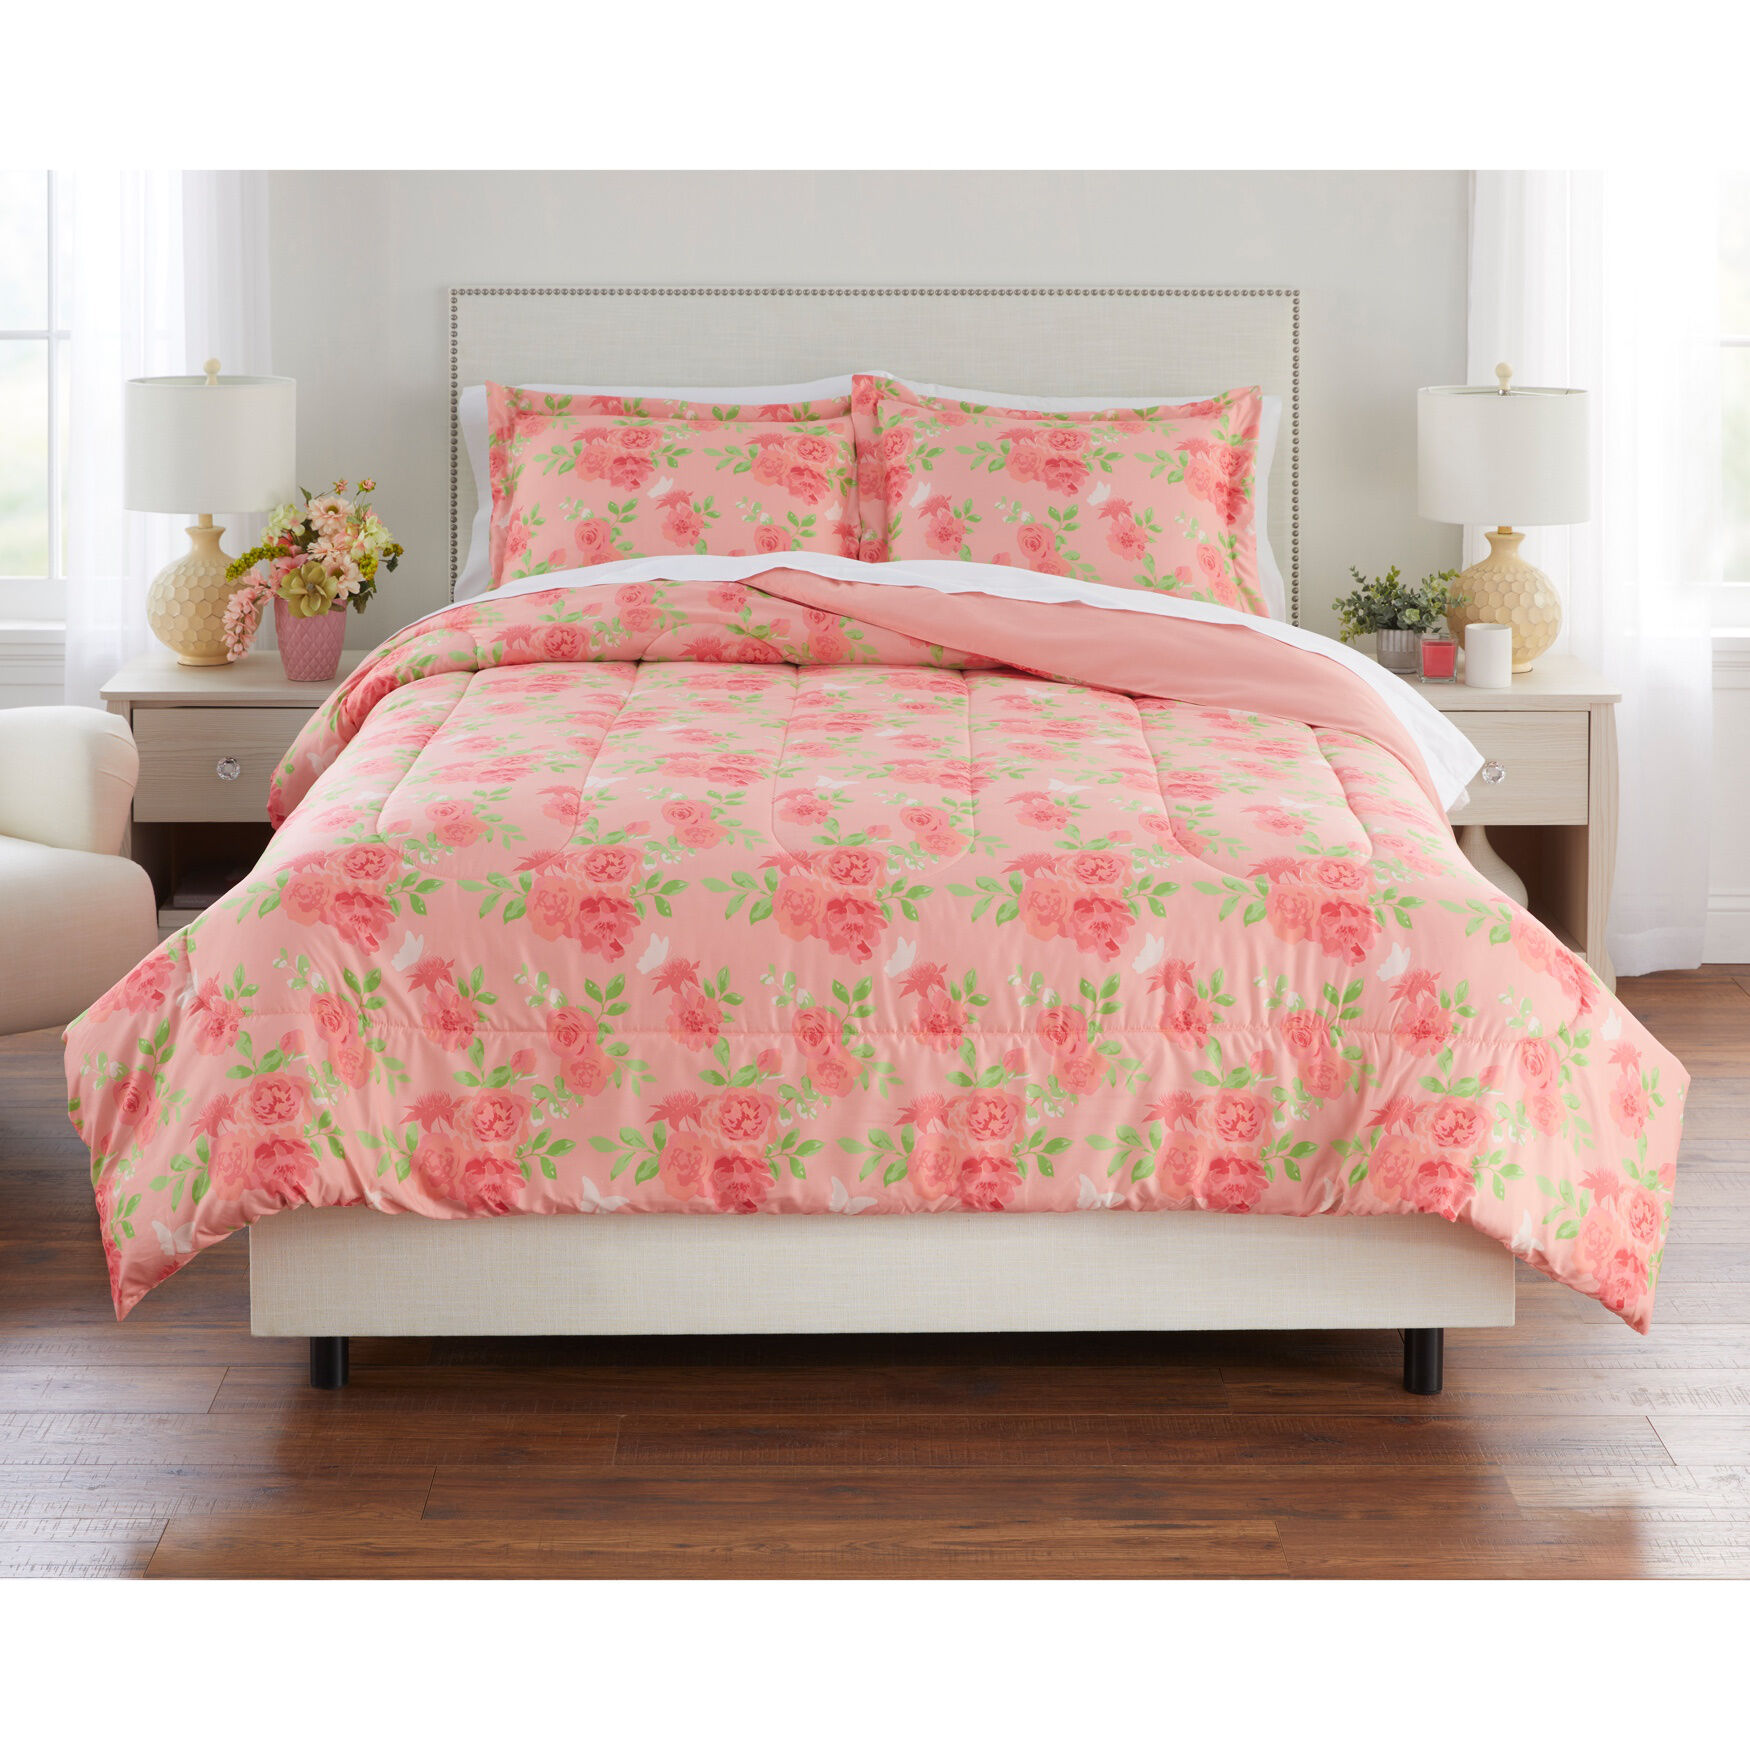 Bedding: Bed Covers, Comforters & Sets | Brylane Home